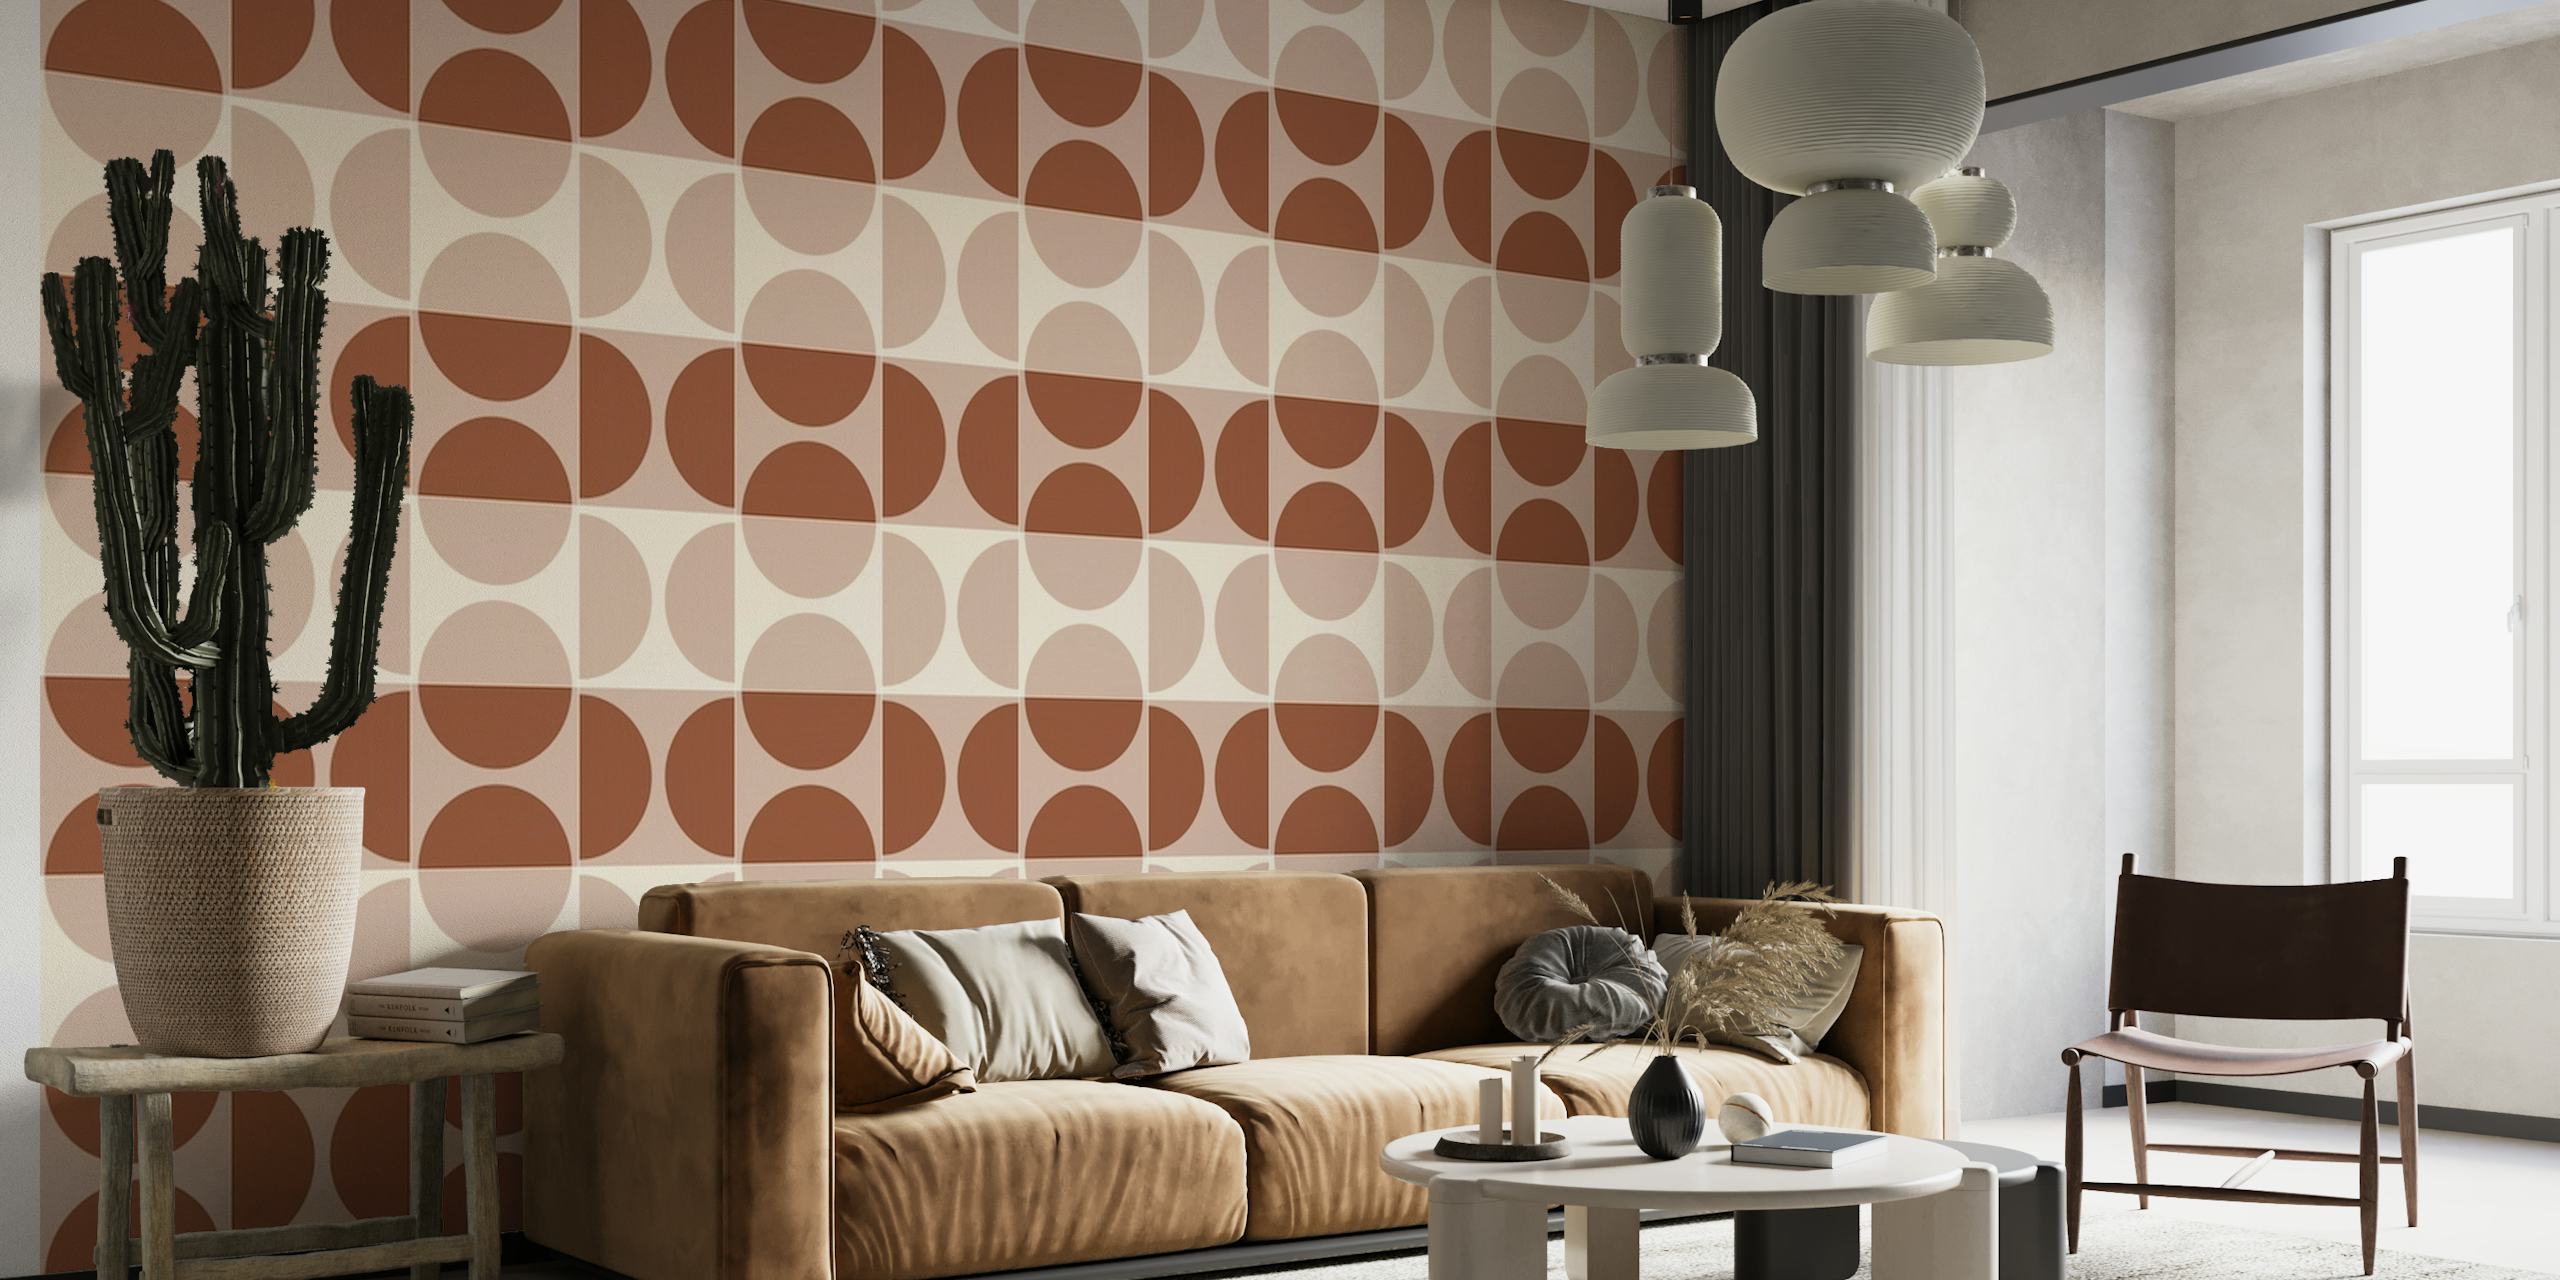 Cotto Tiles Cinnamon and Powder Lines wallpaper